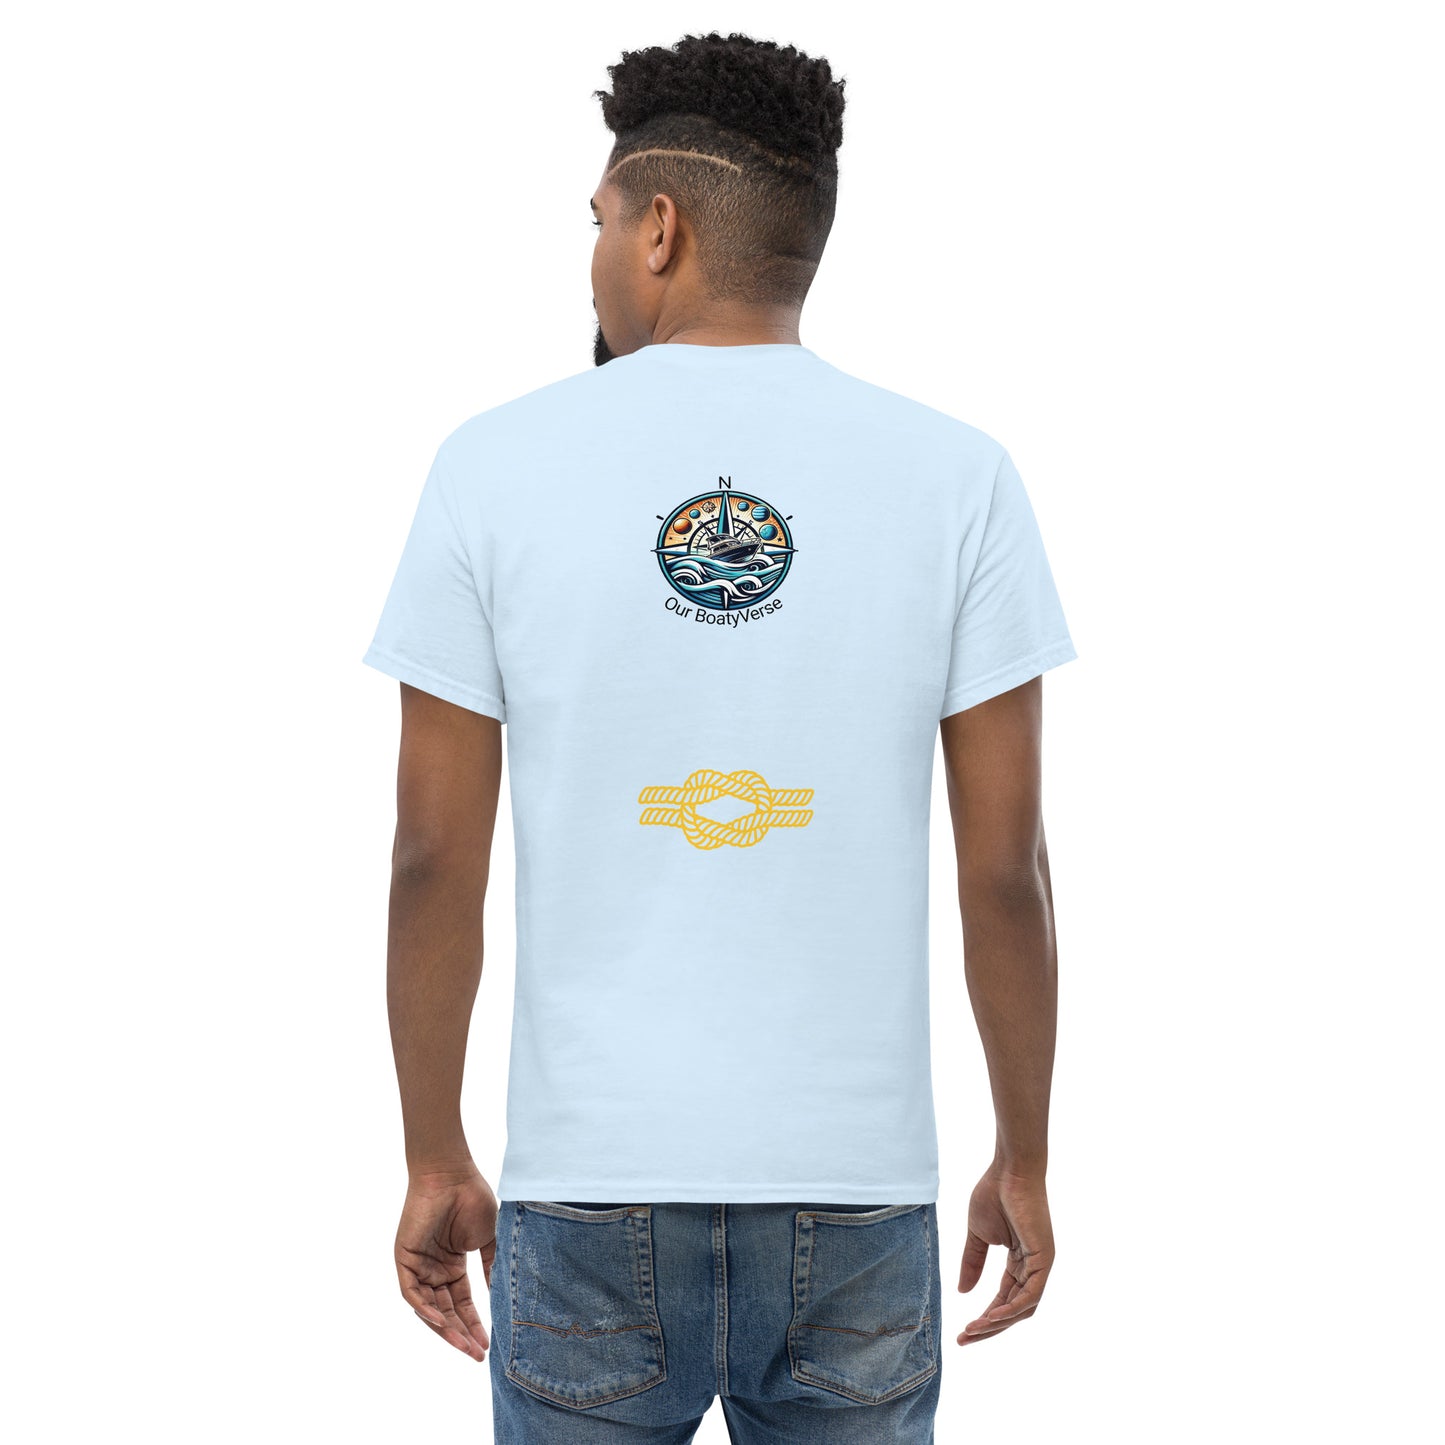 Sailing Around the Universe, Men's classic tee by Our BoatyVerse